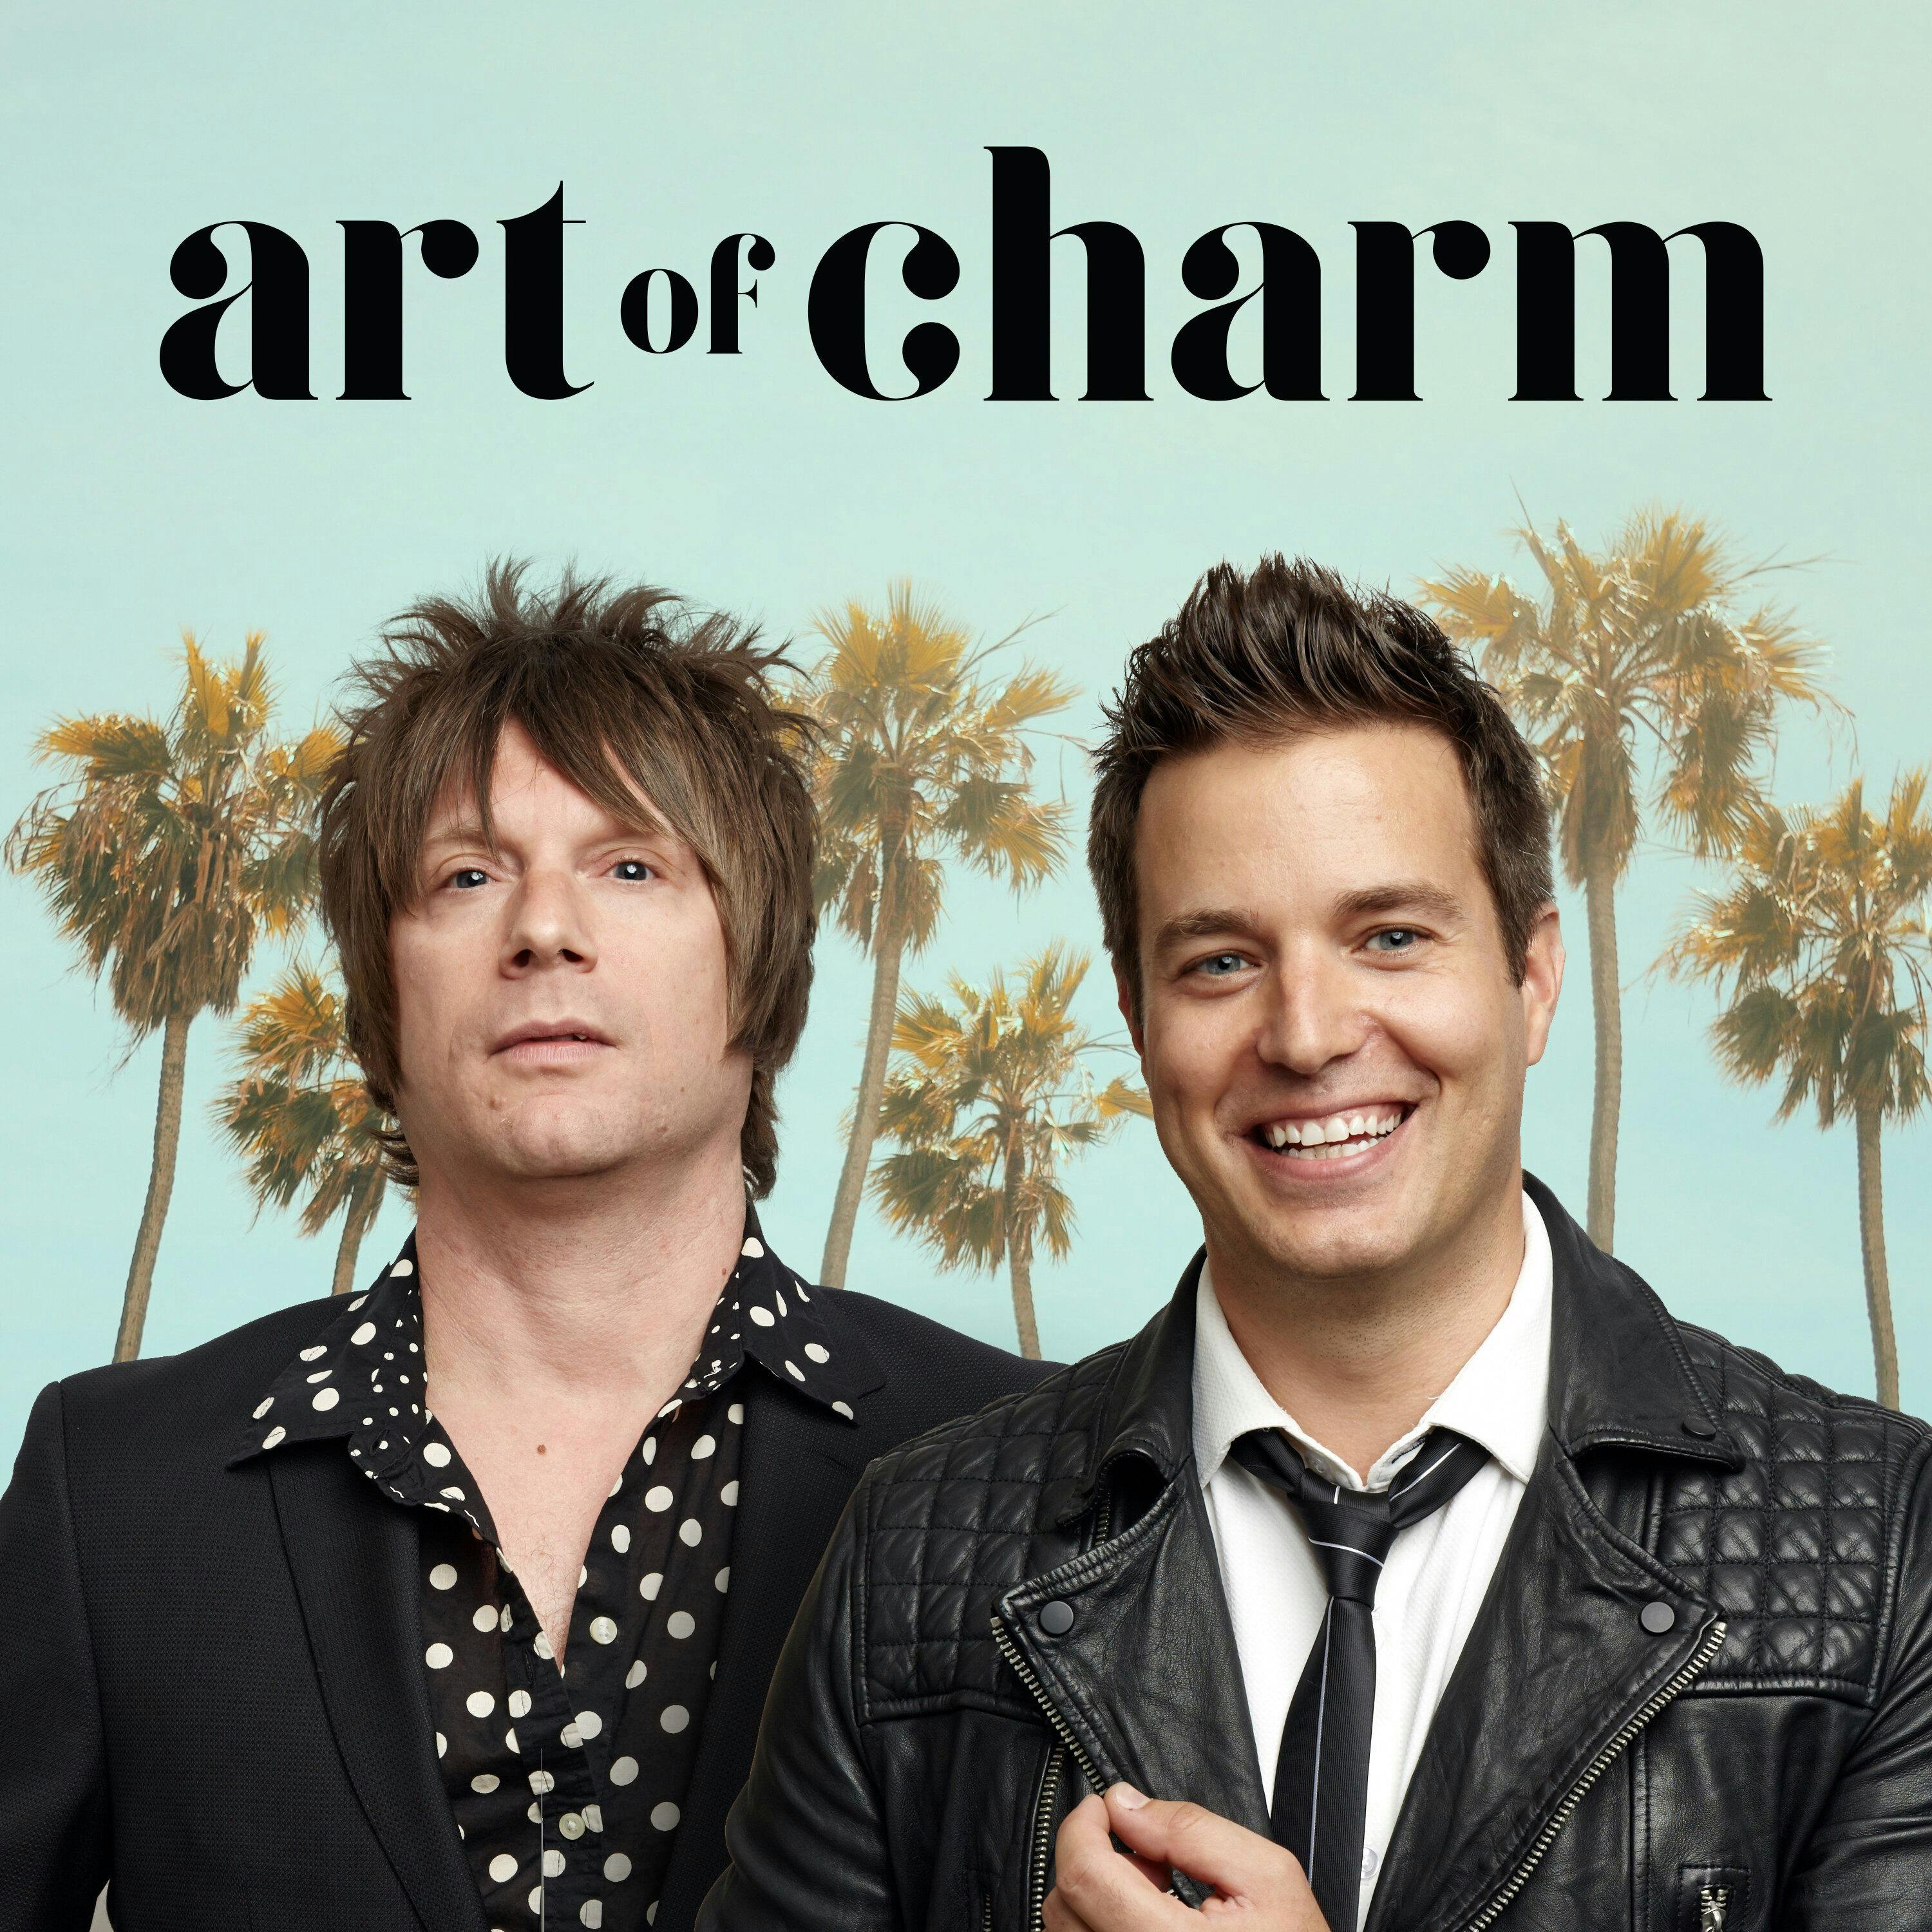 The Art of Charm podcast